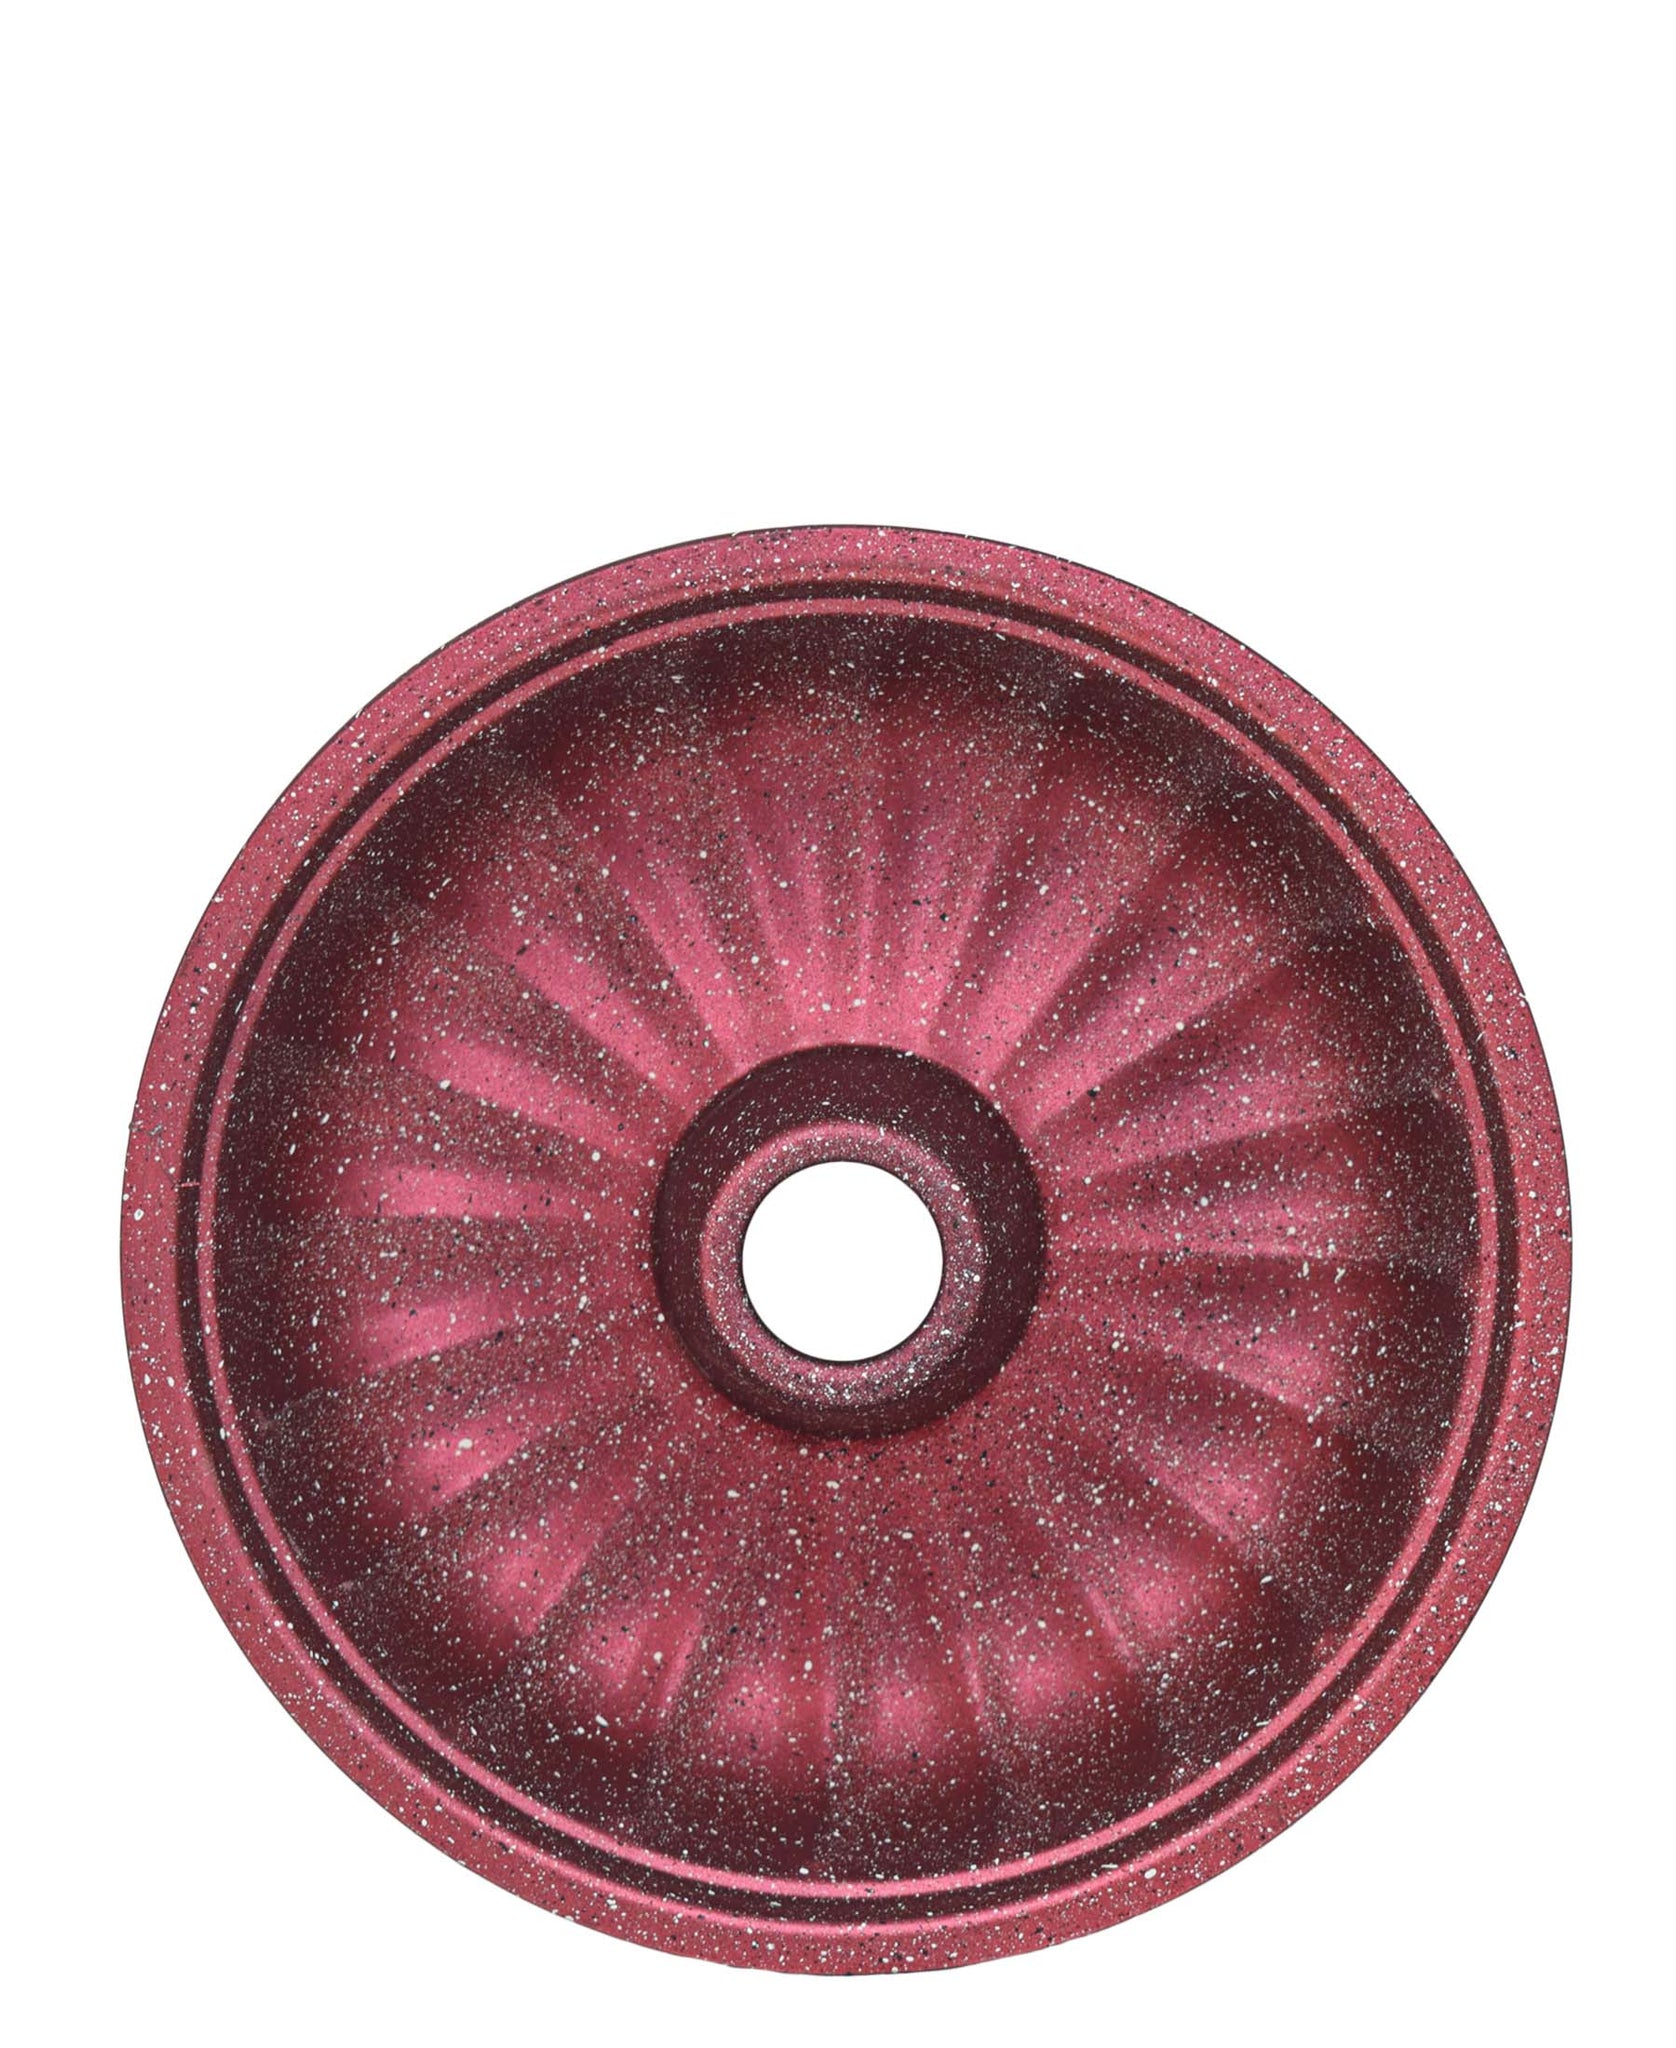 OMS Collection Granite Cake Mould 28CM - Red